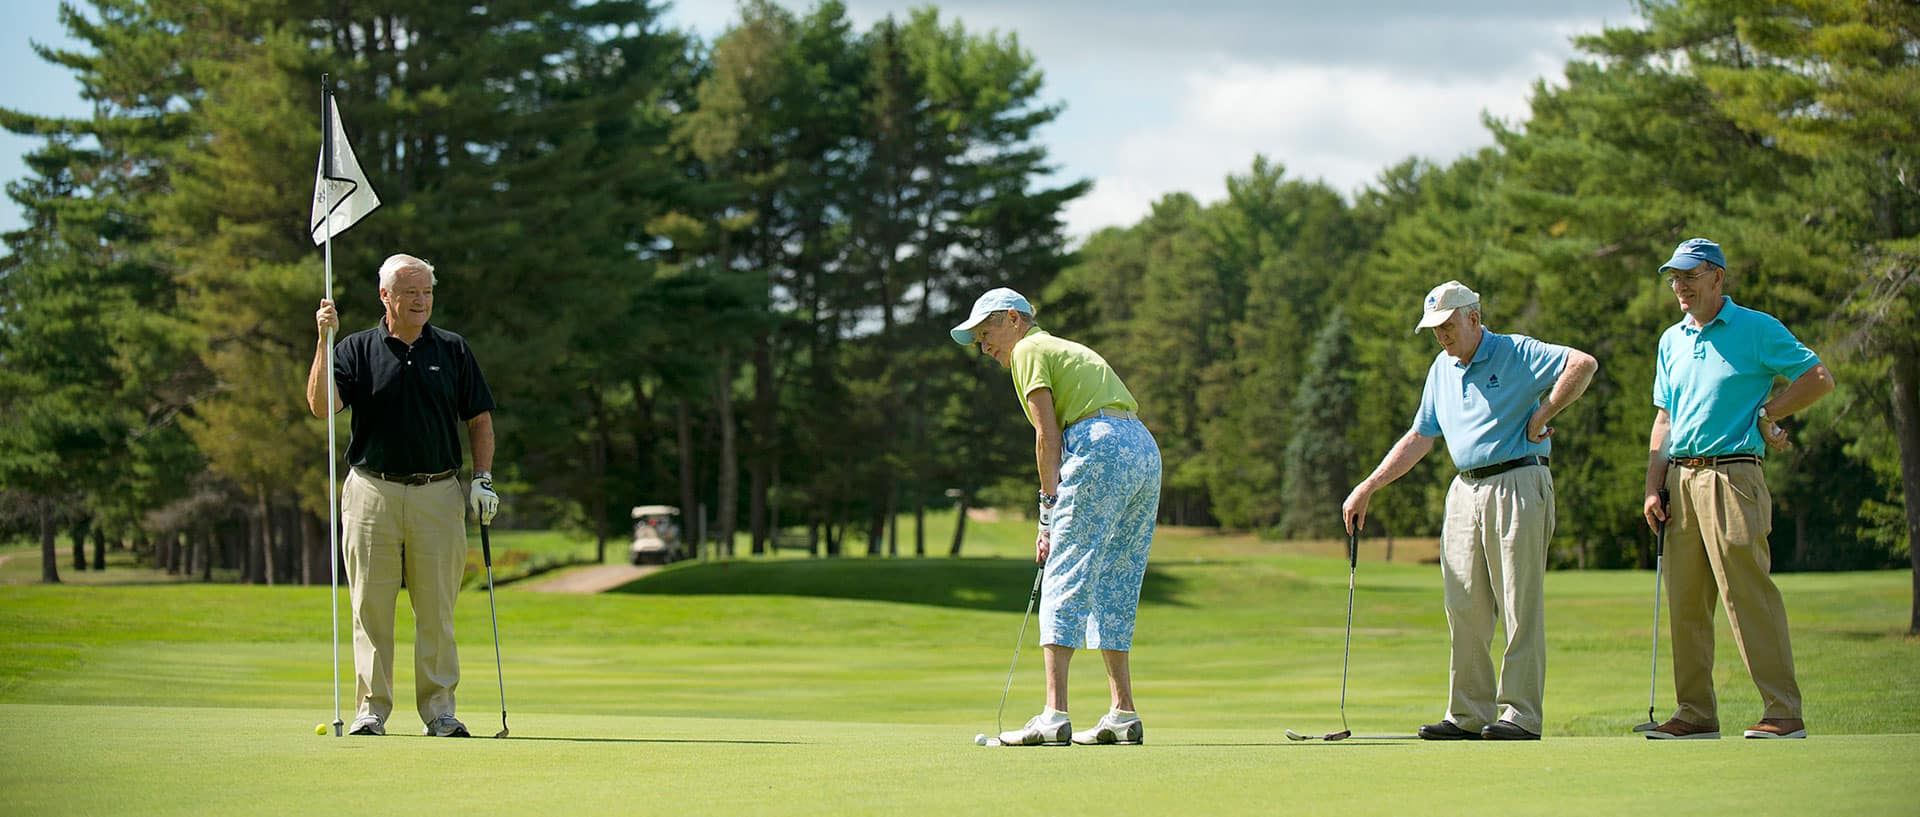 Retirement at it's best! Thornton Oaks' residents at the Brunswick golf course.